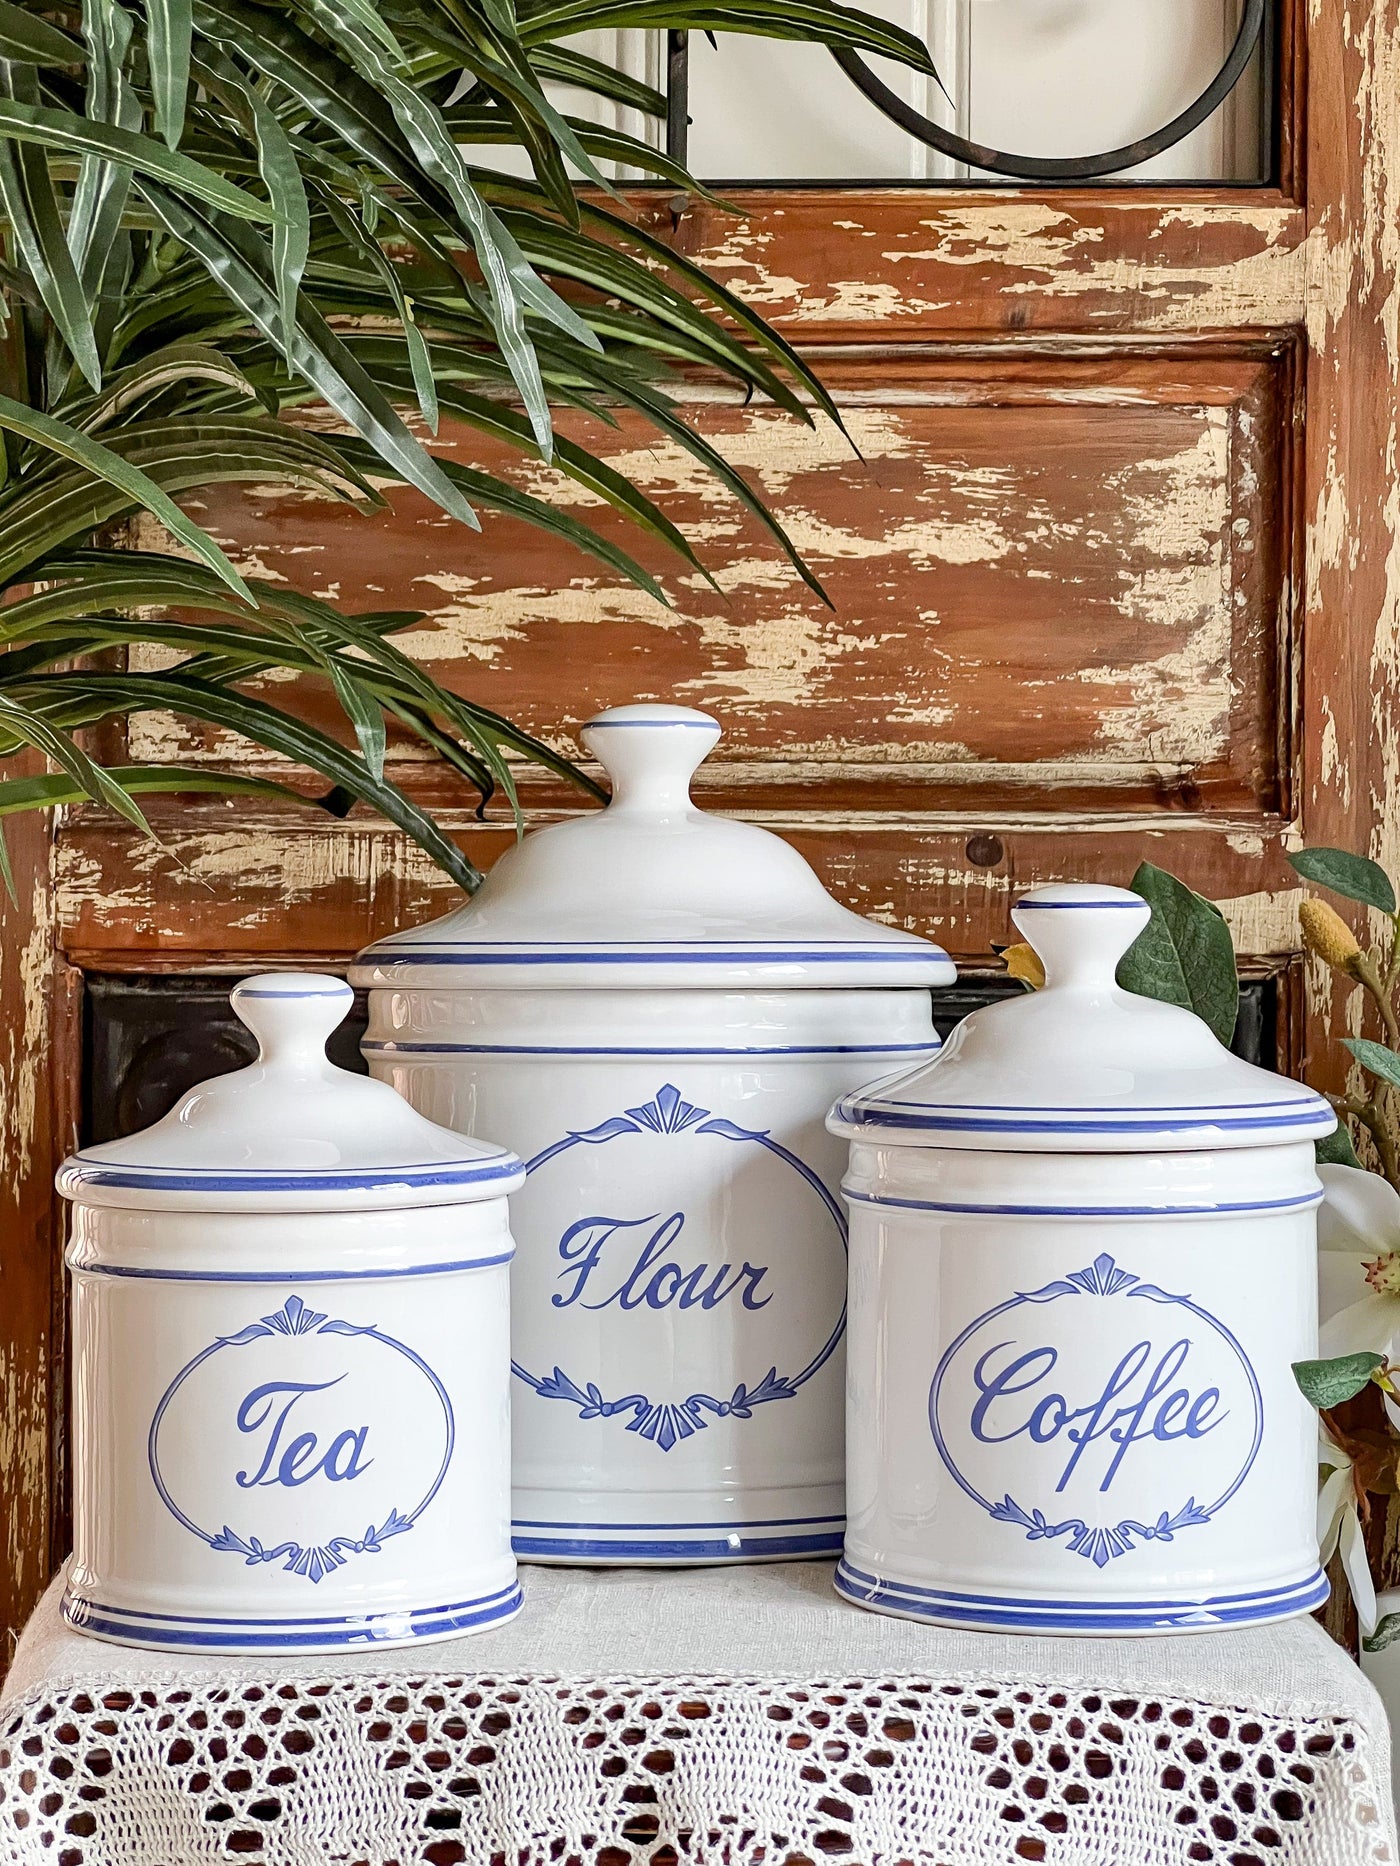 Portugal Blue & White Vintage Canister Set by Fapodel (3 piece set) Revive In Style Vintage Furniture Painted Refinished Redesign Beautiful One of a Kind Artistic Antique Unique Home Decor Interior Design French Country Shabby Chic Cottage Farmhouse Grandmillenial Coastal Chalk Paint Metallic Glam Eclectic Quality Dovetailed Rustic Furniture Painter Pinterest Bedroom Living Room Entryway Kitchen Home Trends House Styles Decorating ideas